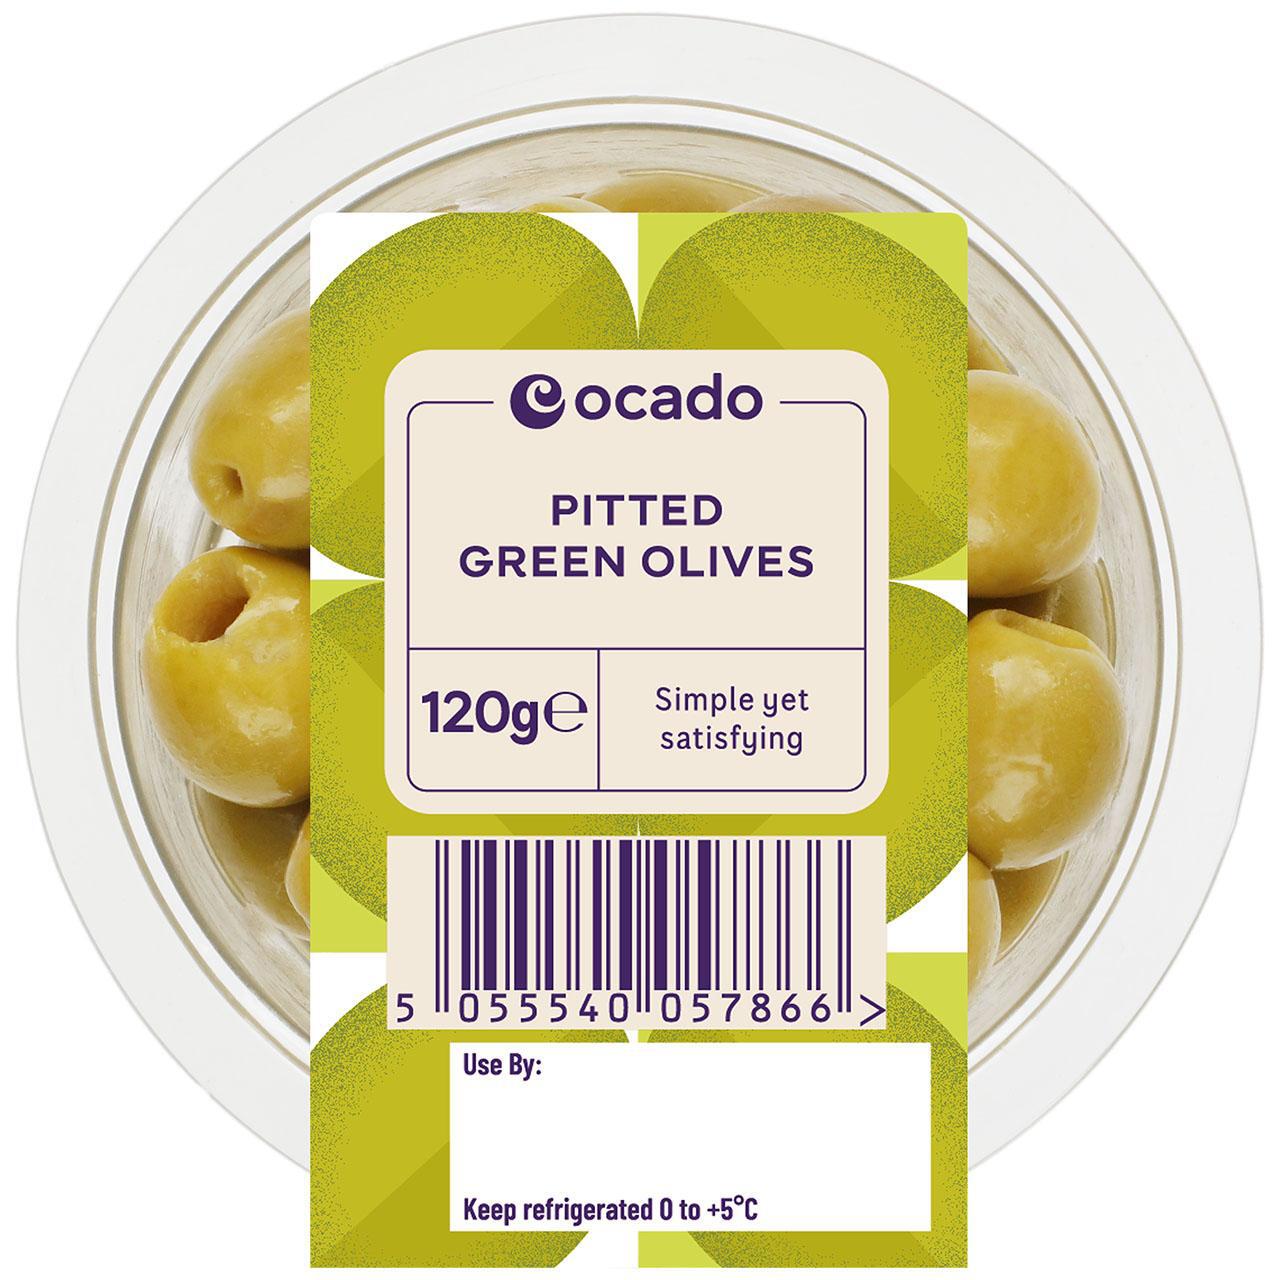 Ocado Pitted Green Olives 120g